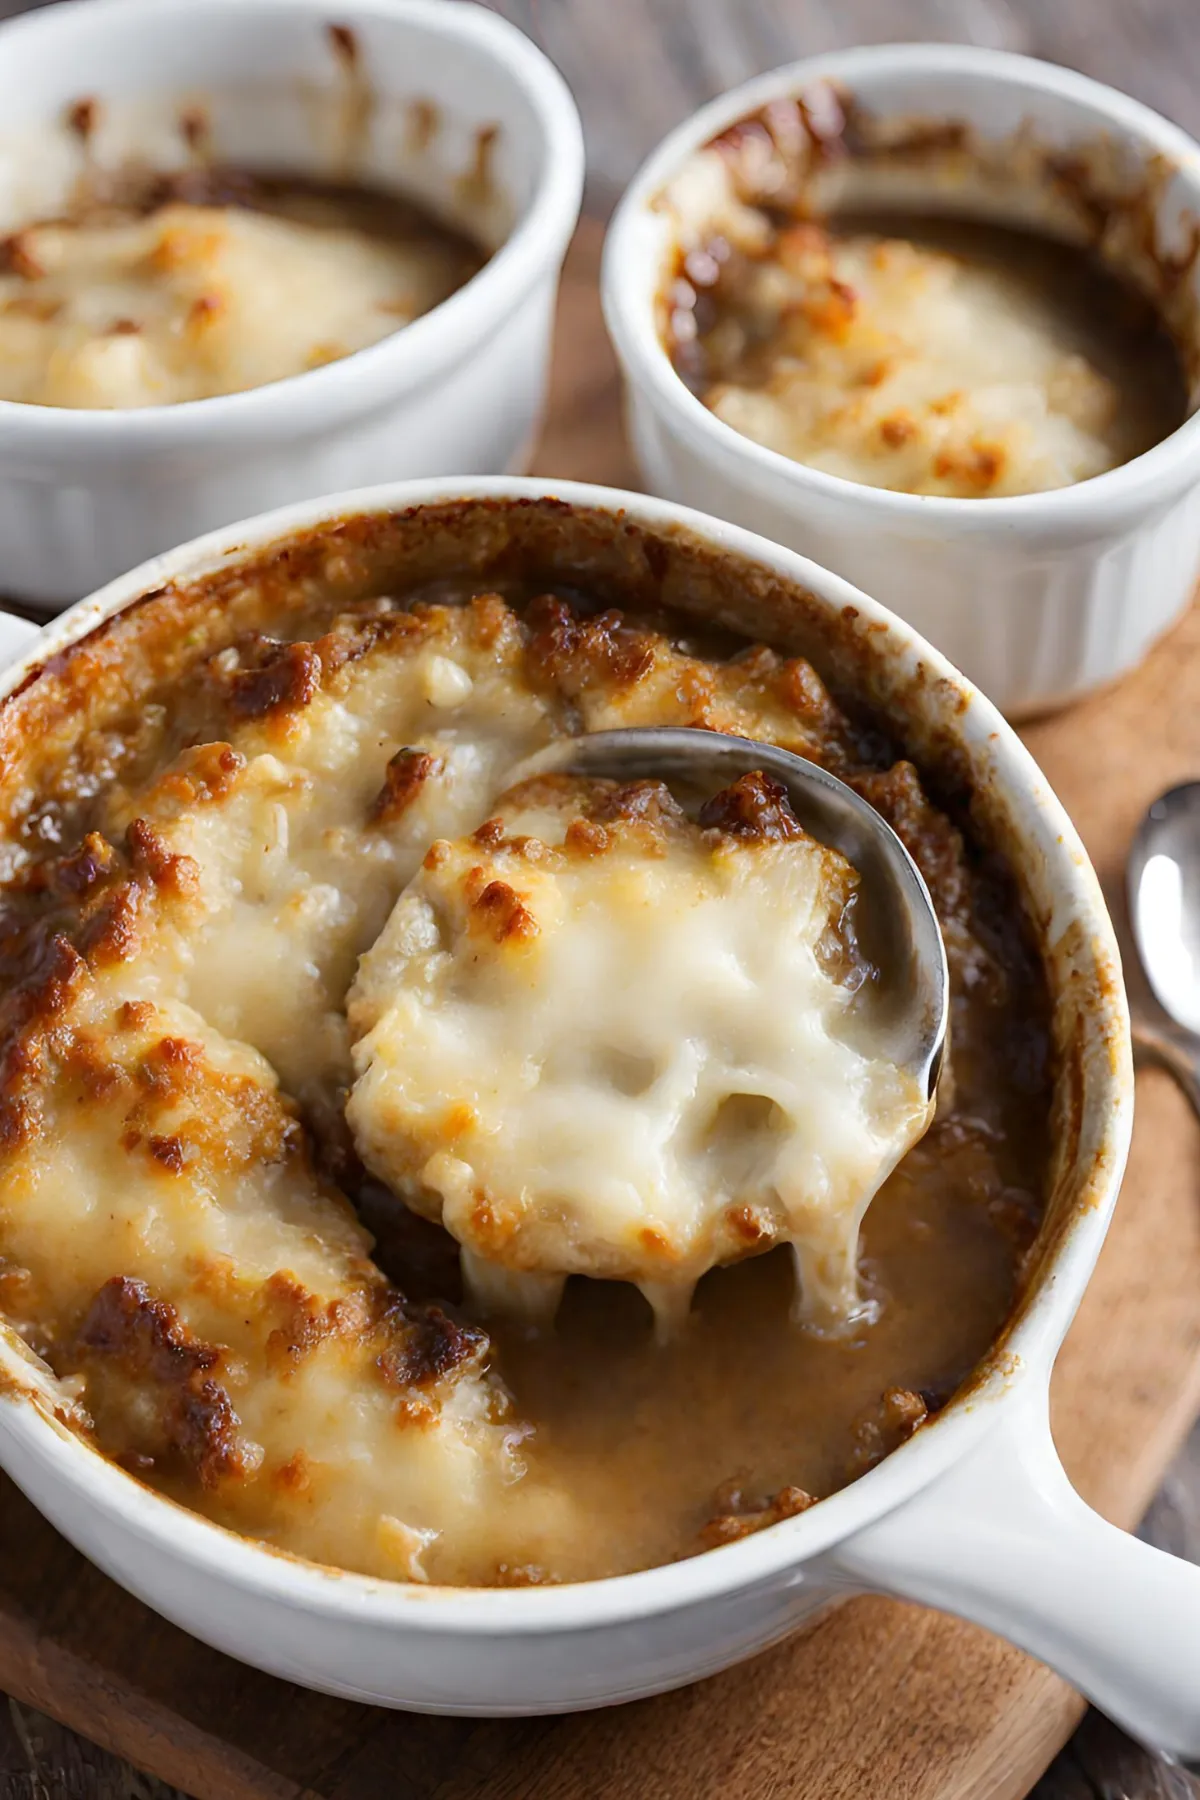 Why Use Campbell's French Onion Soup in Chicken Recipes